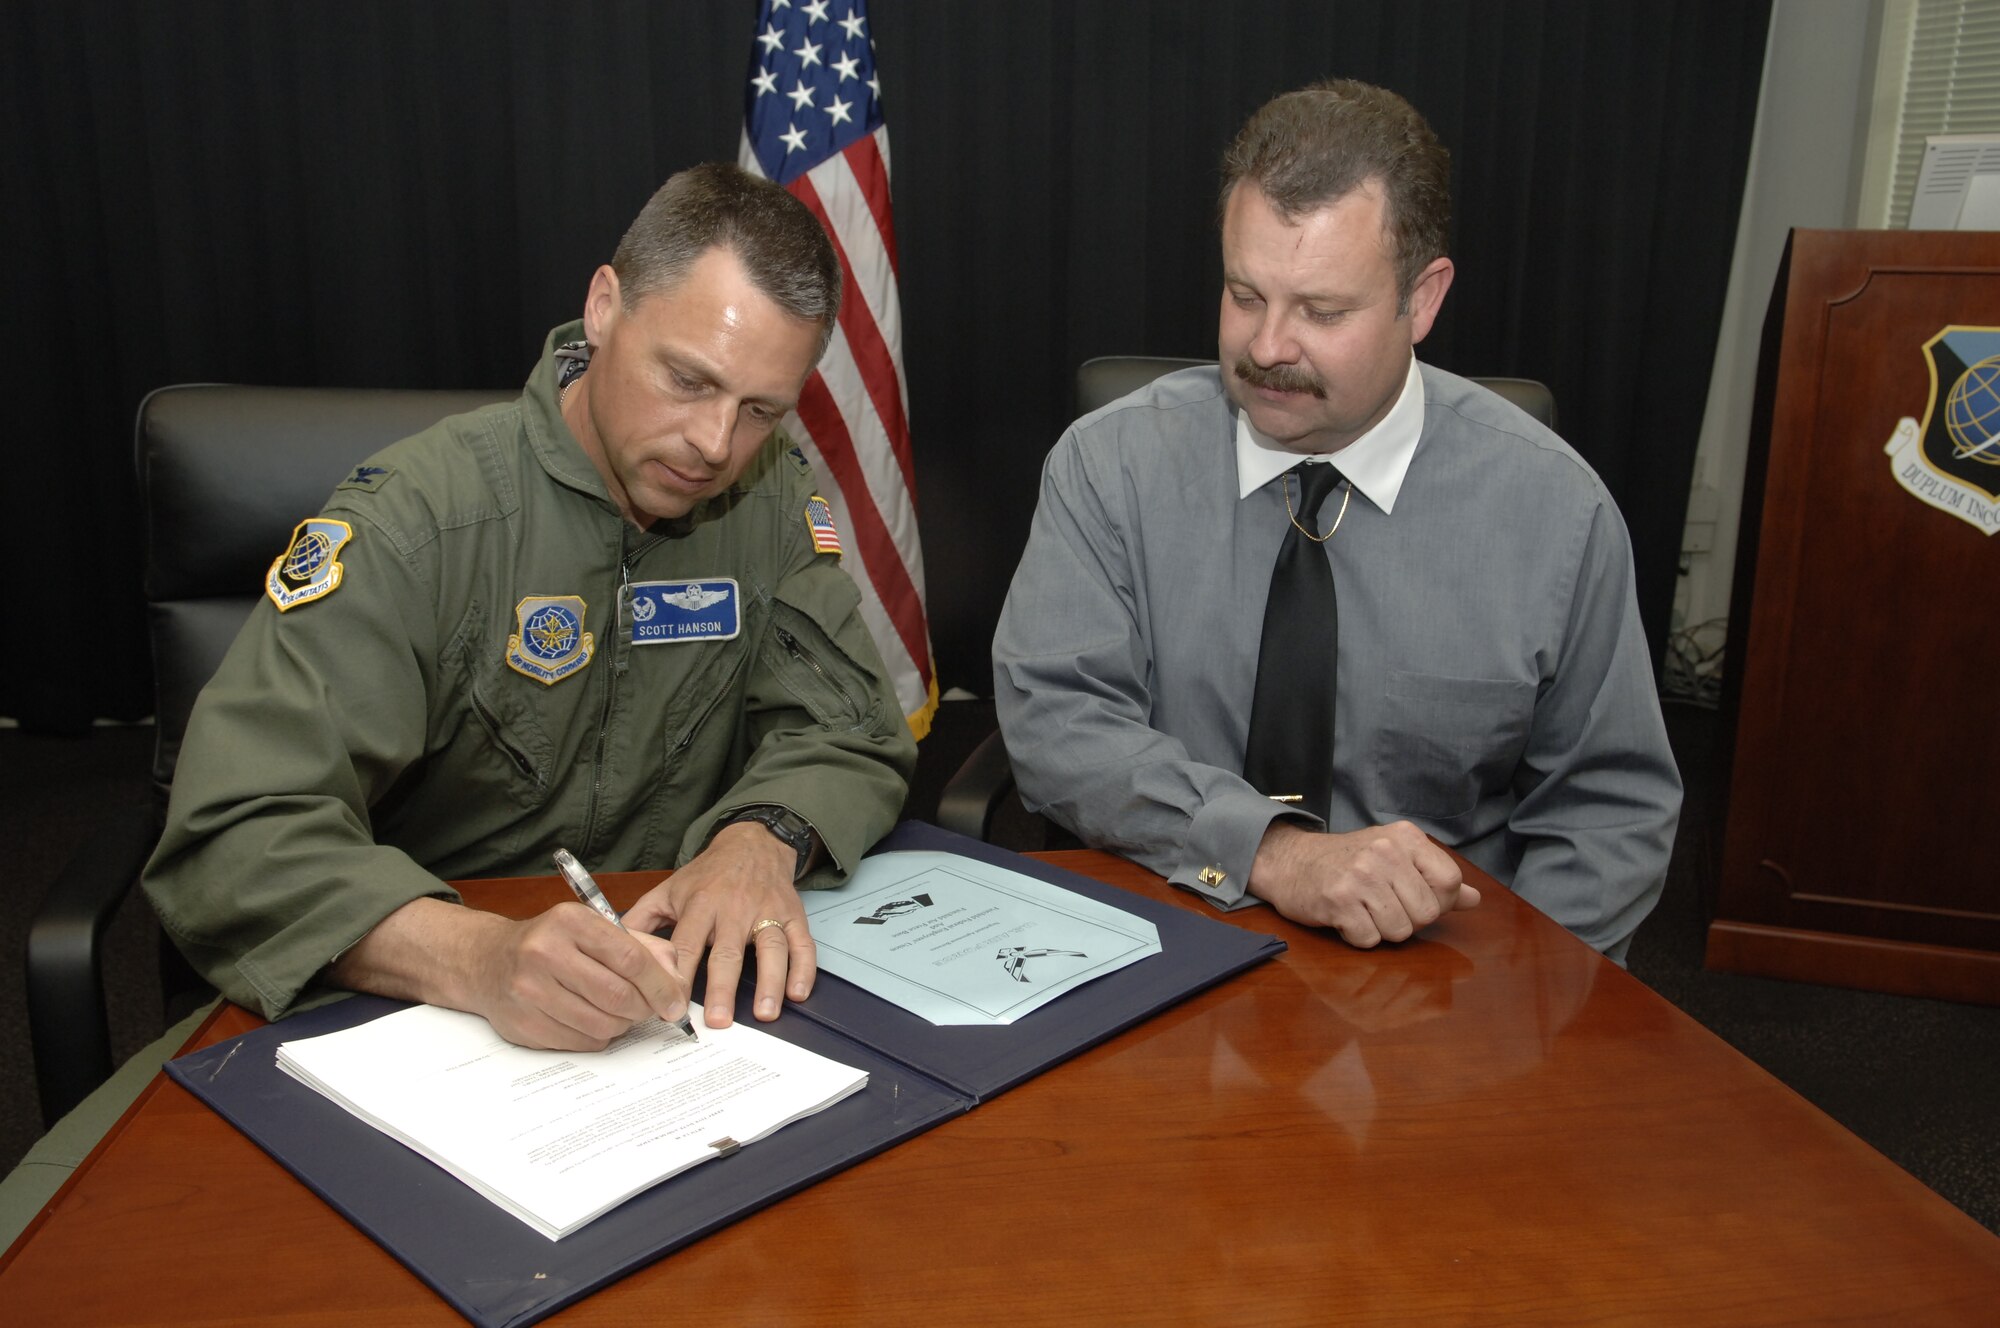 FAIRCHILD AIR FORCE BASE, Wash. – Col. Scott Hanson, 92nd Air Refueling Wing commander, and David Starr, Fairchild Federal Employees Union’s president, sign a new labor agreement May 7. If approved by DoD’s Civilian Personnel Management Service, the new labor agreement will be effective June 8. (U.S. Air Force photo/Senior Airman Chad Watkins)